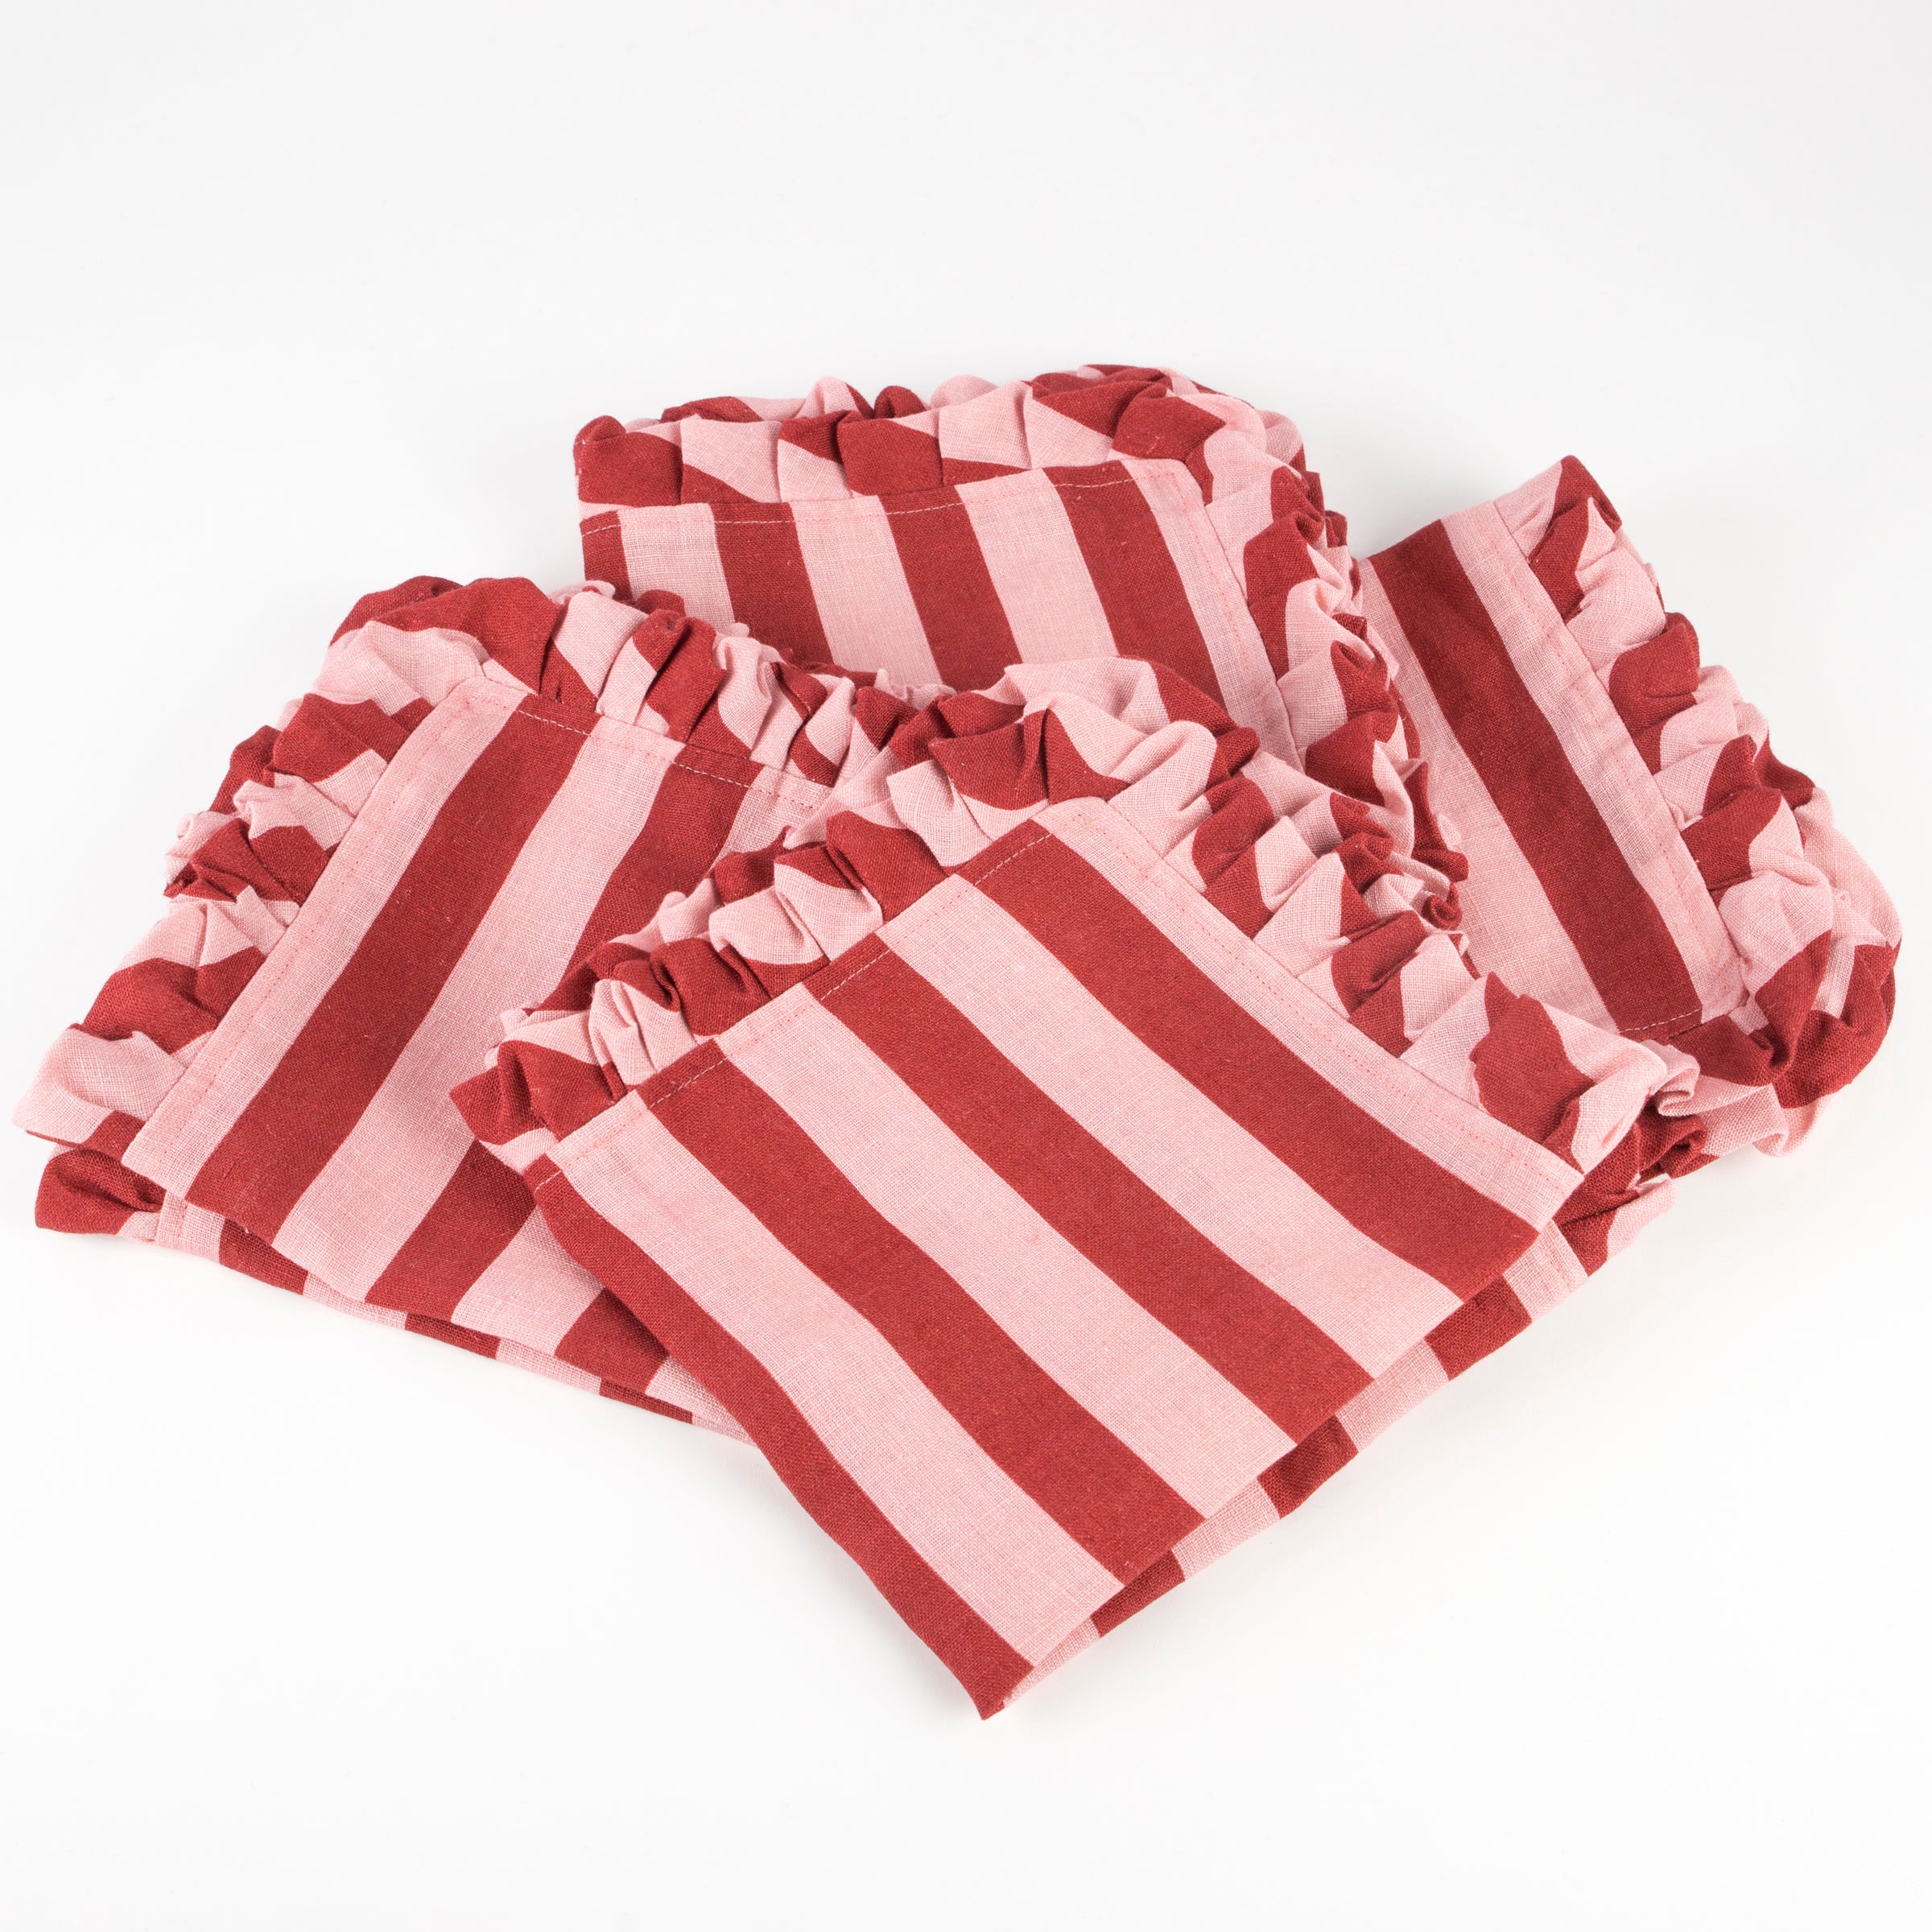 Our fabric napkins in festive red and pink are wonderful Christmas tableware.